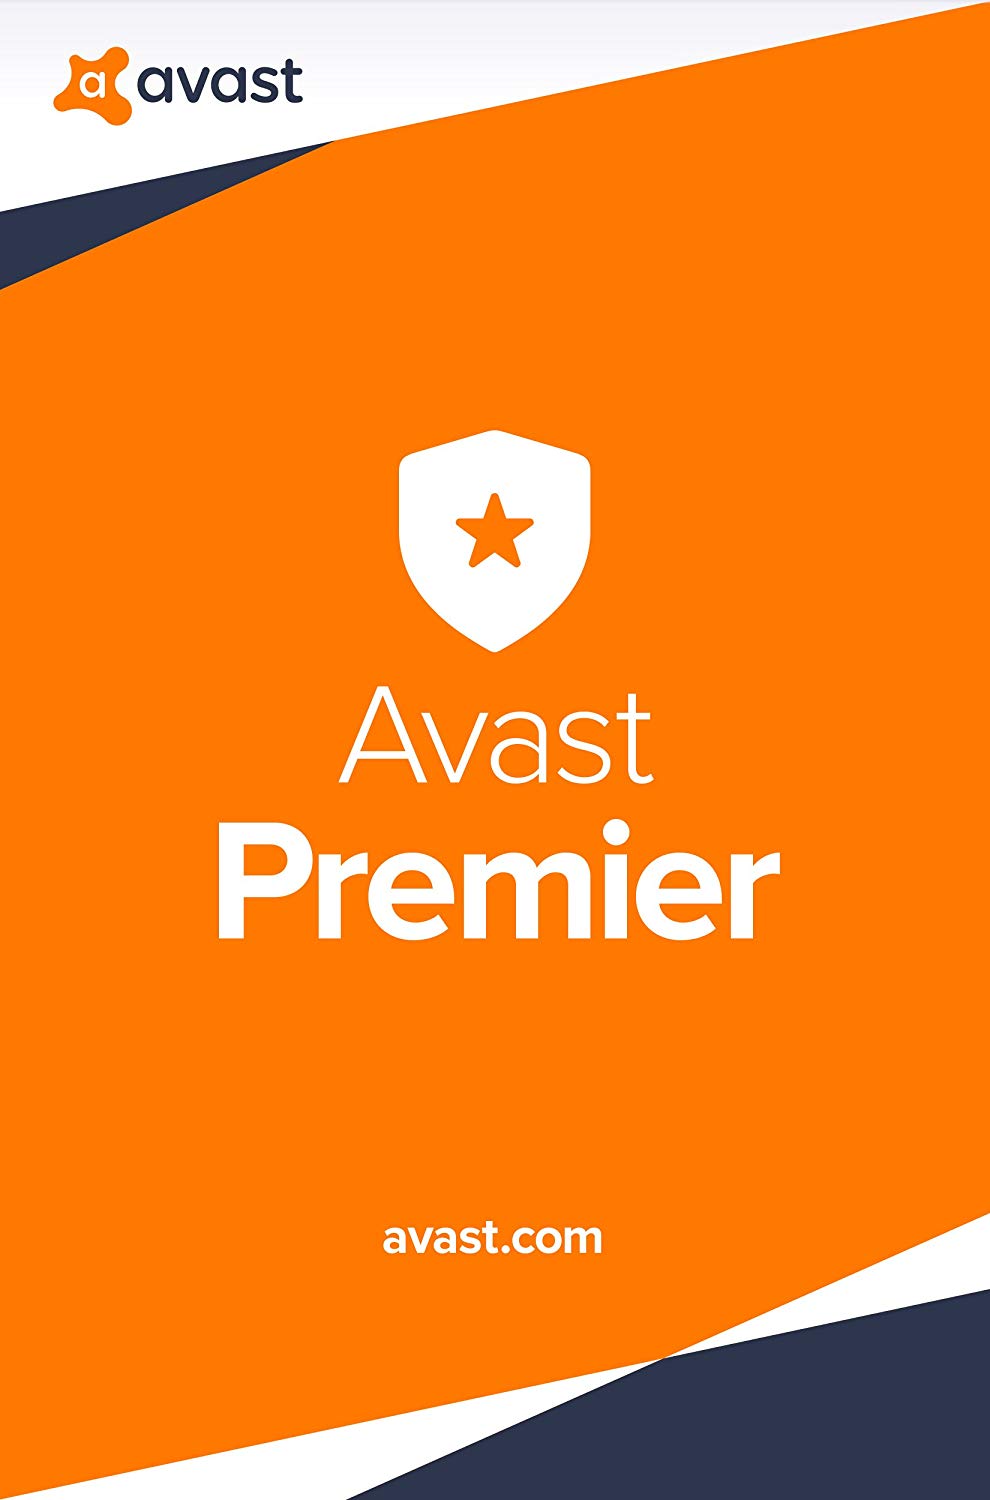 Avast Premier CD Key (Digital Download) - Various Options Available: Unlimited Devices